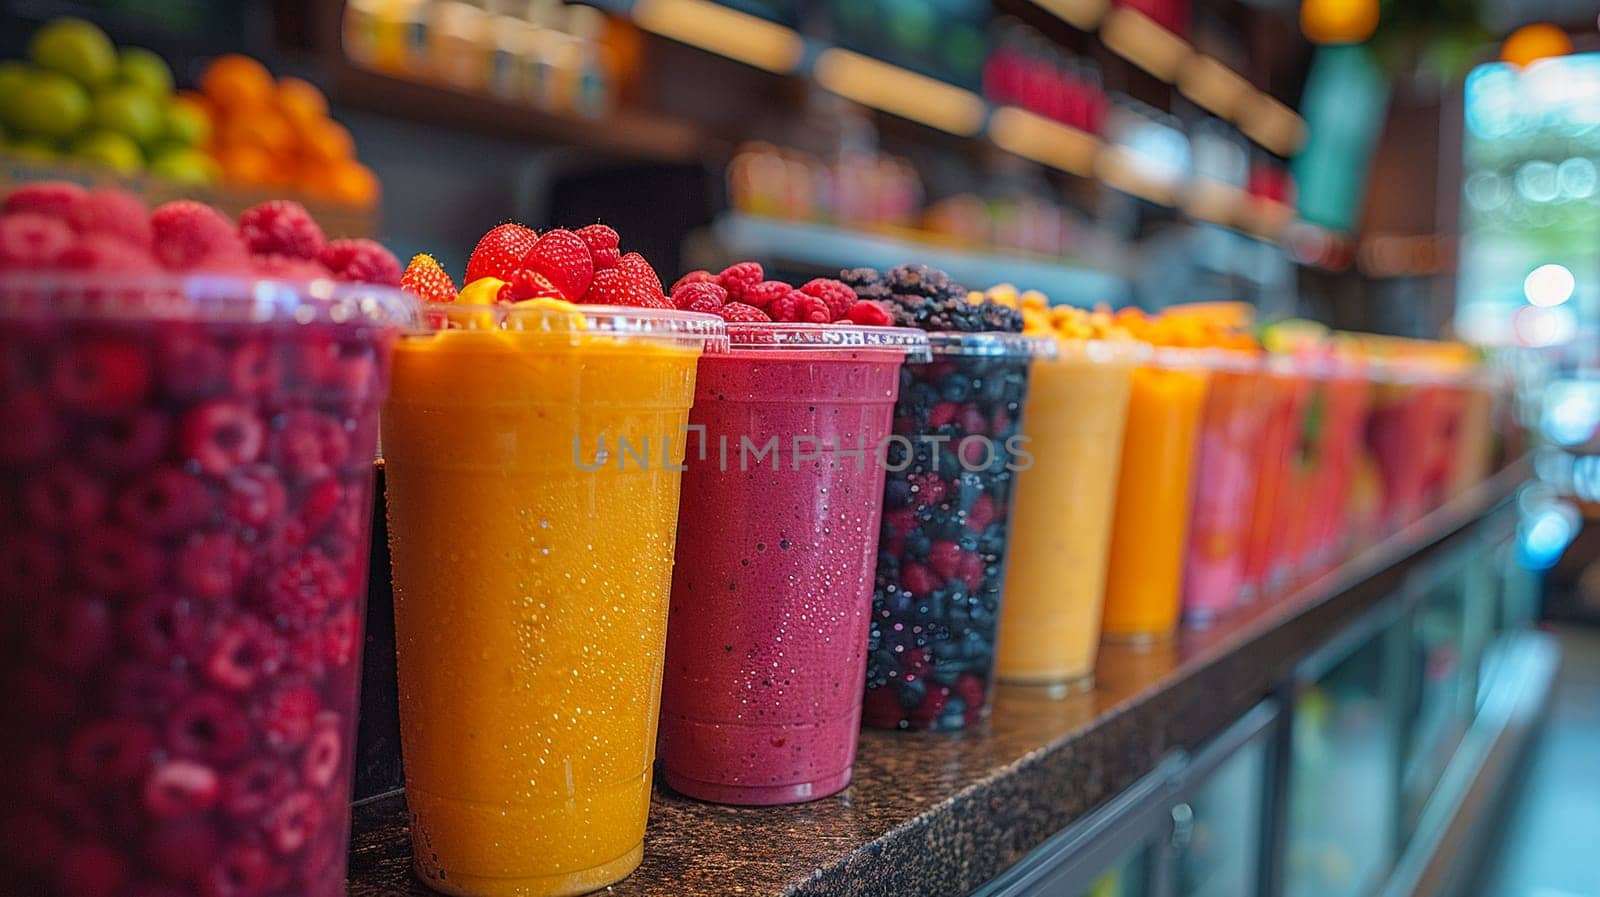 Vibrant Smoothie Kiosk Blends Health with Taste in Business of Refreshing Beverages by Benzoix